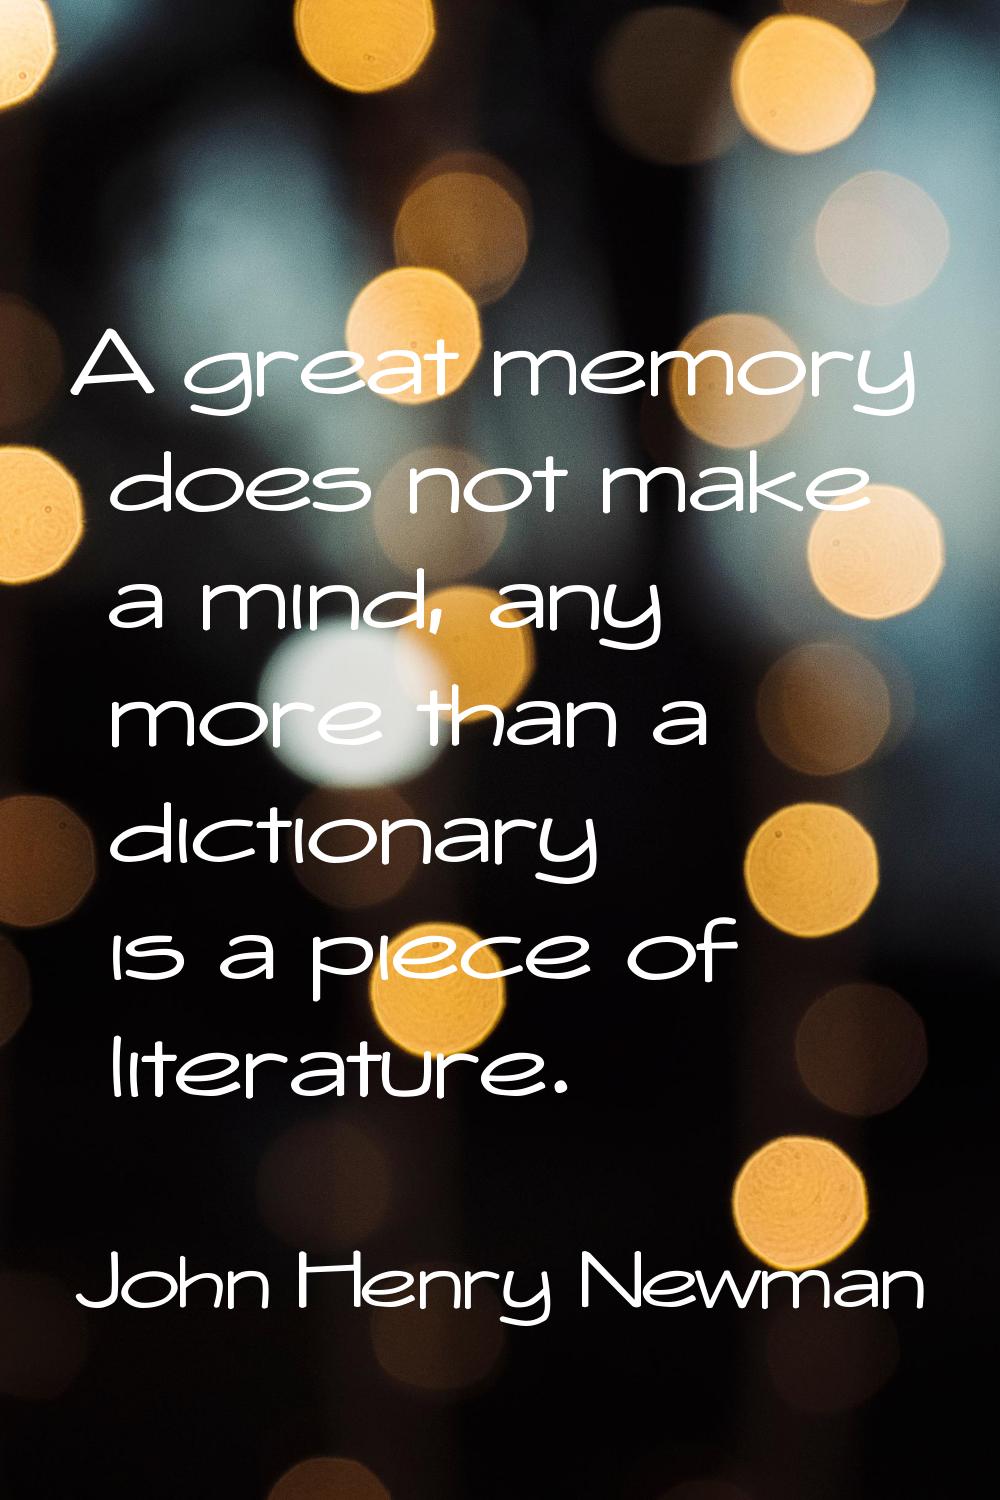 A great memory does not make a mind, any more than a dictionary is a piece of literature.